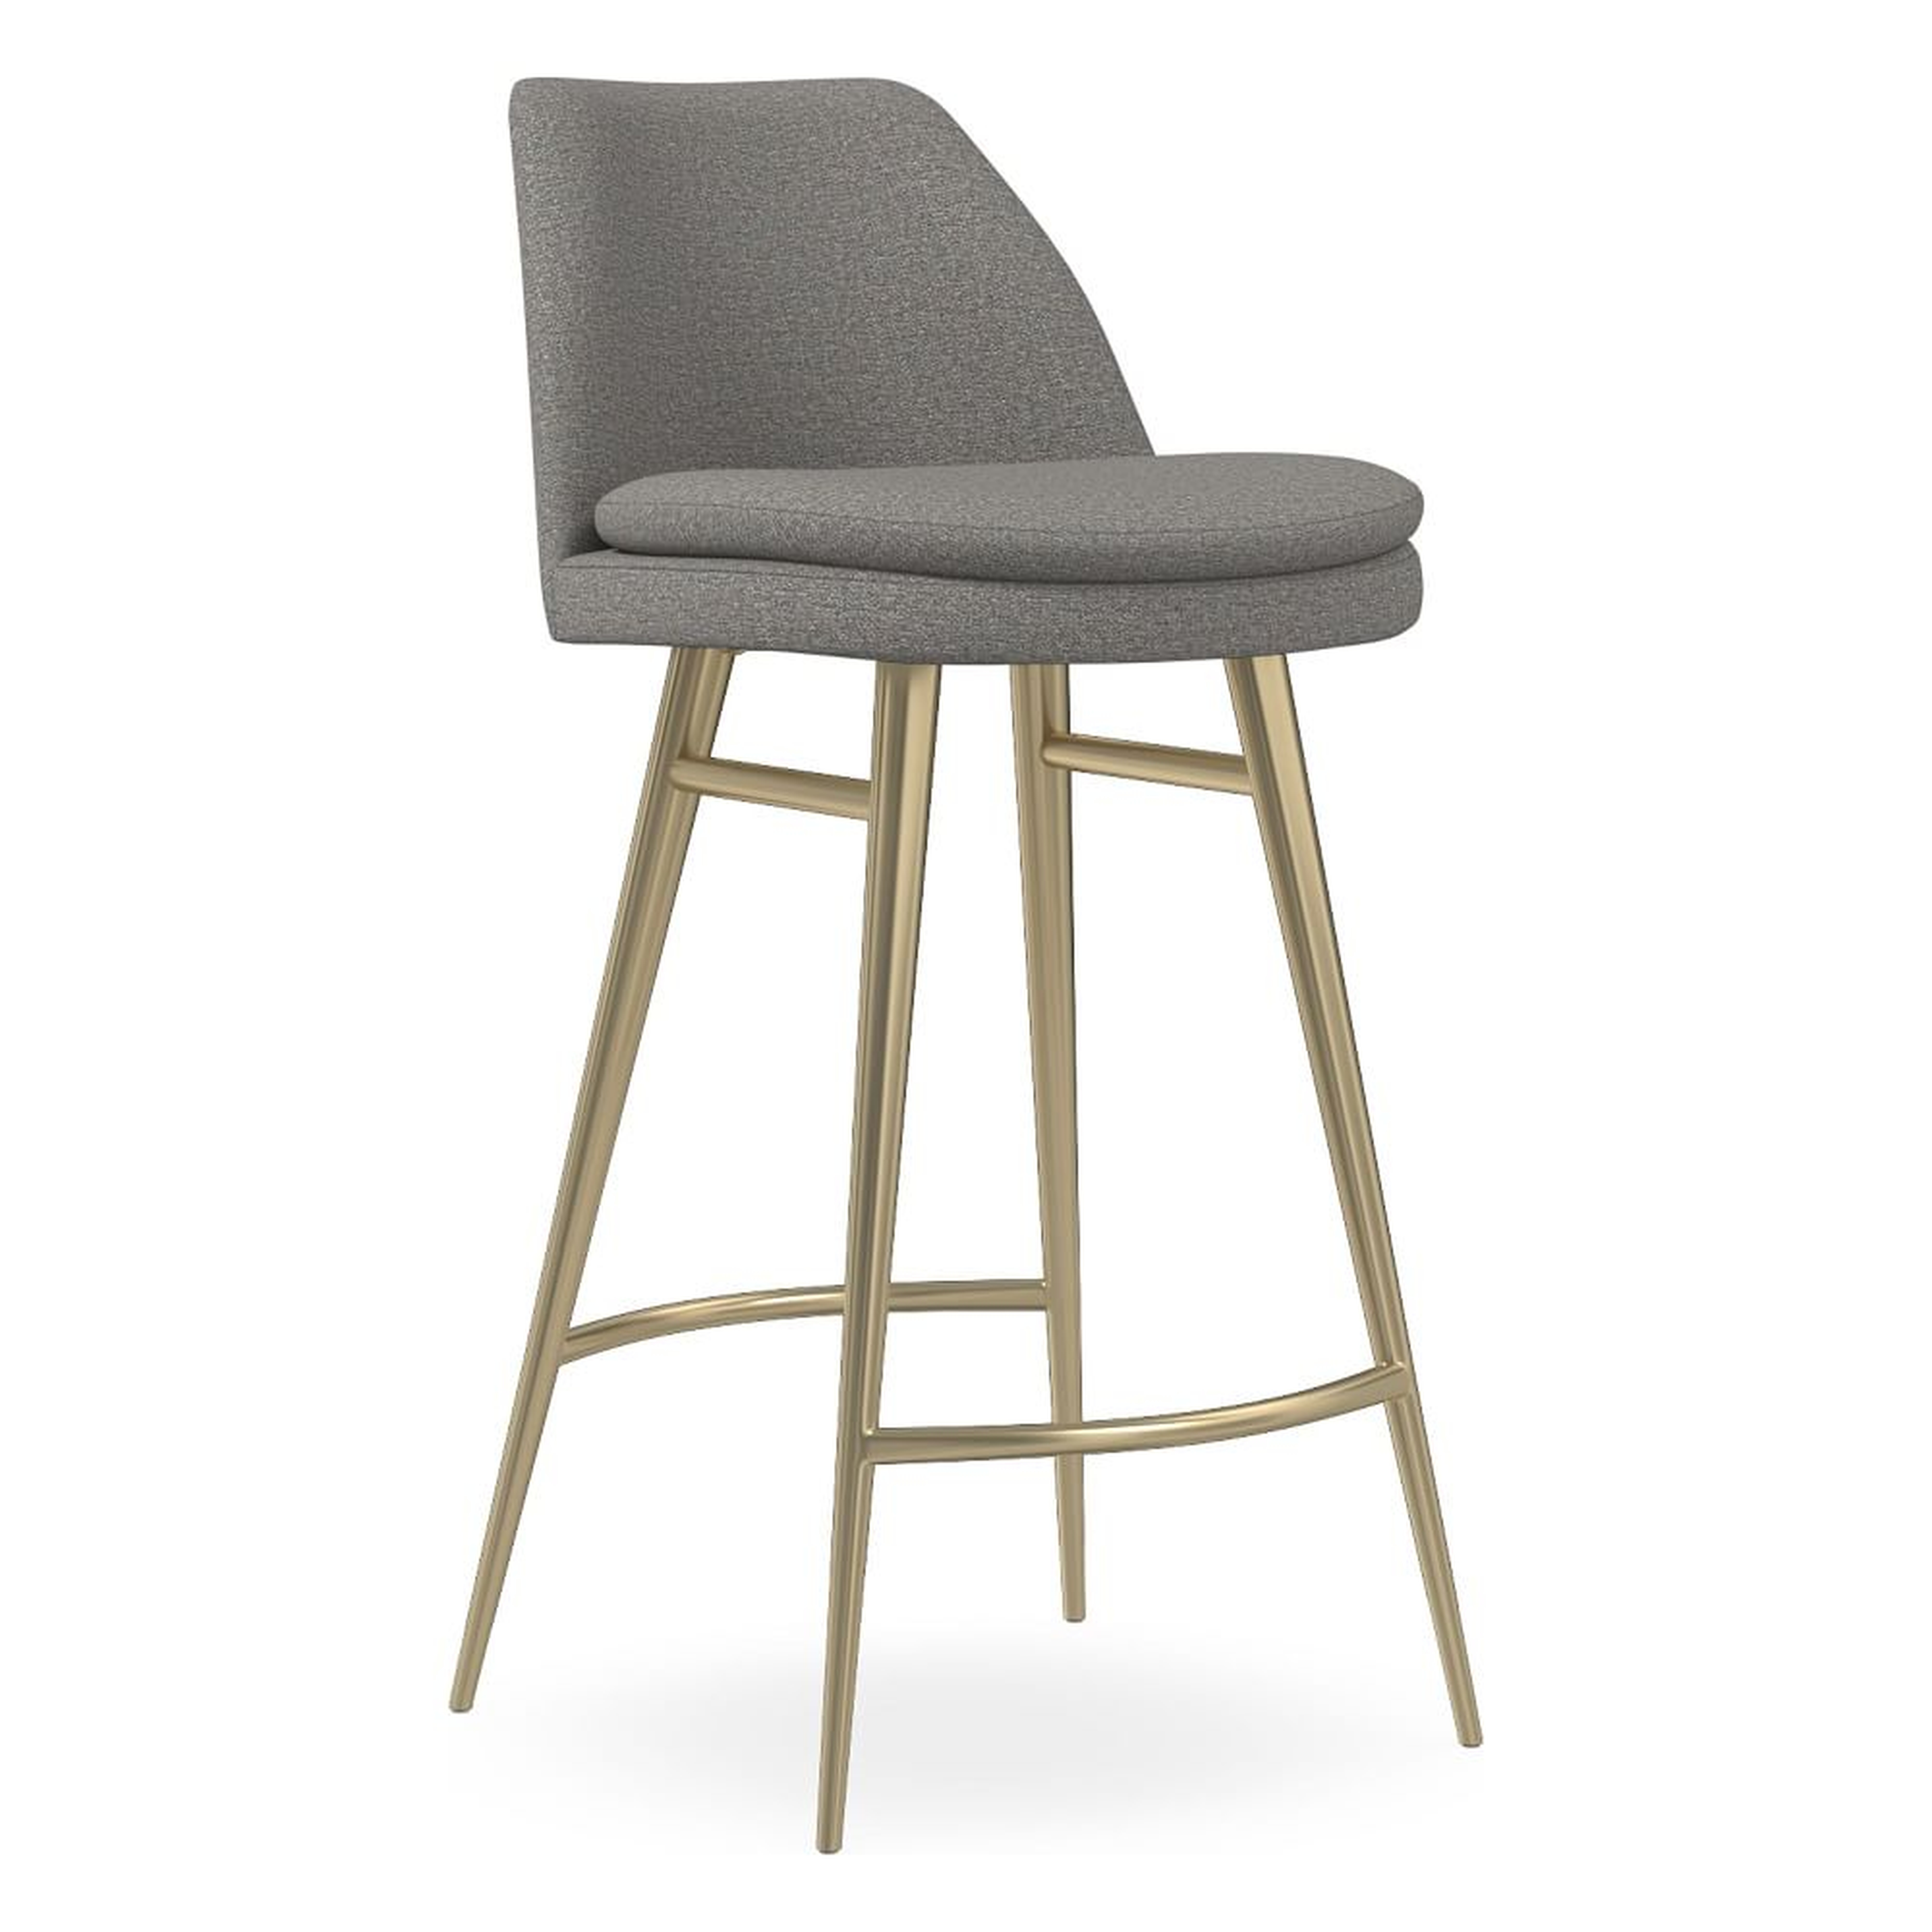 Finley Counter Stool,Chenille Tweed,Silver,Light Bronze - West Elm